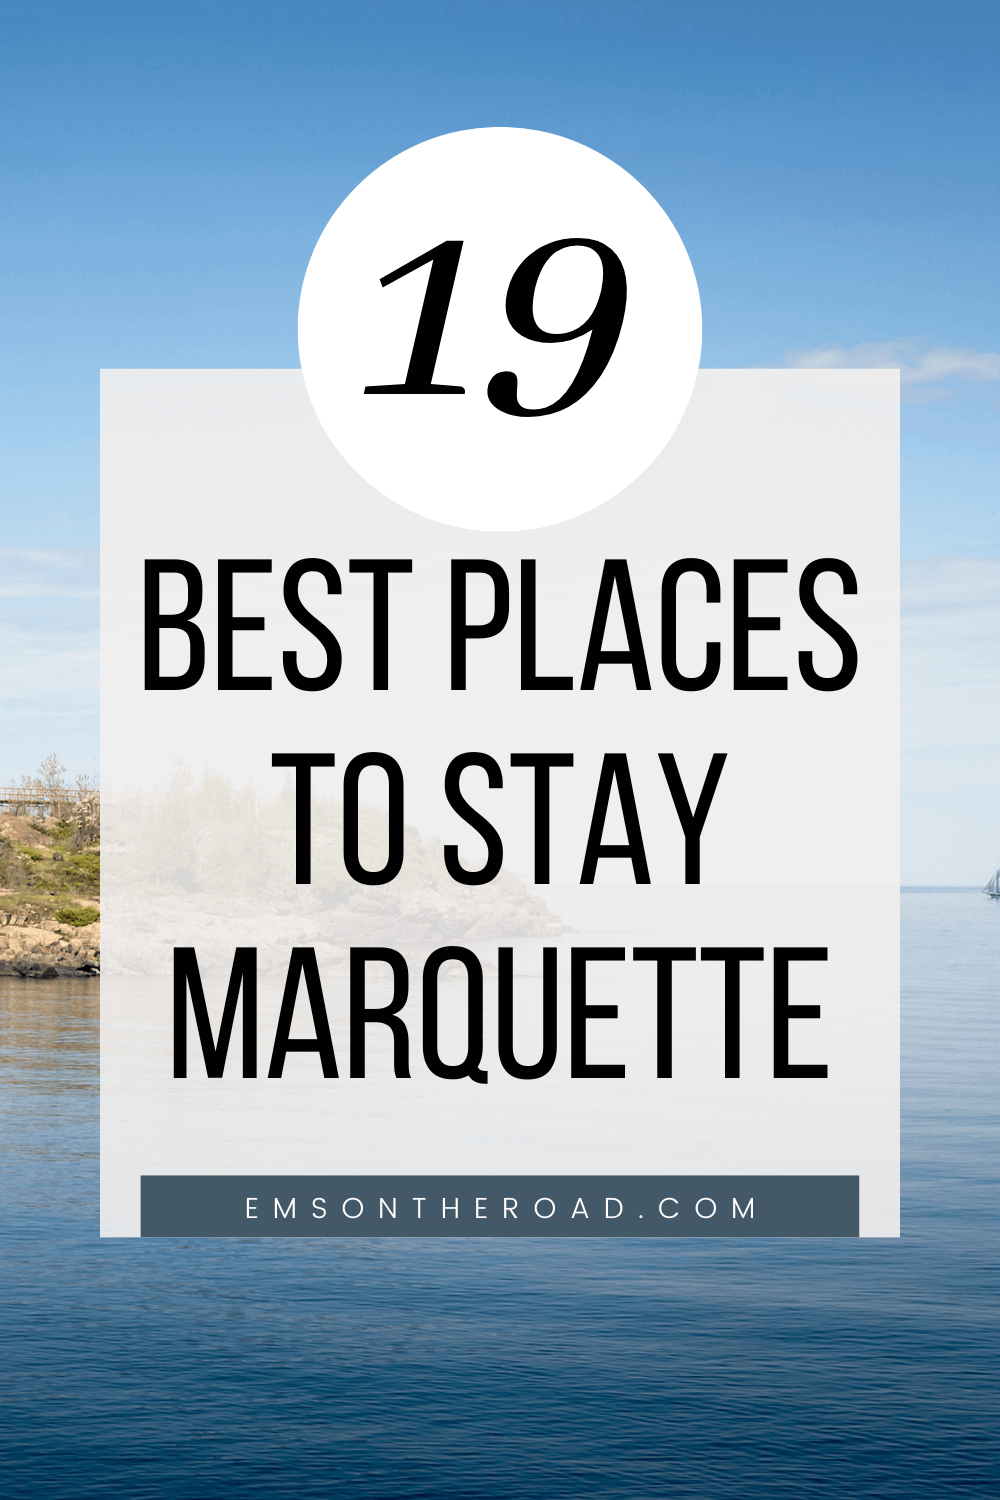 Best Places to stay in Marquette, Michigan